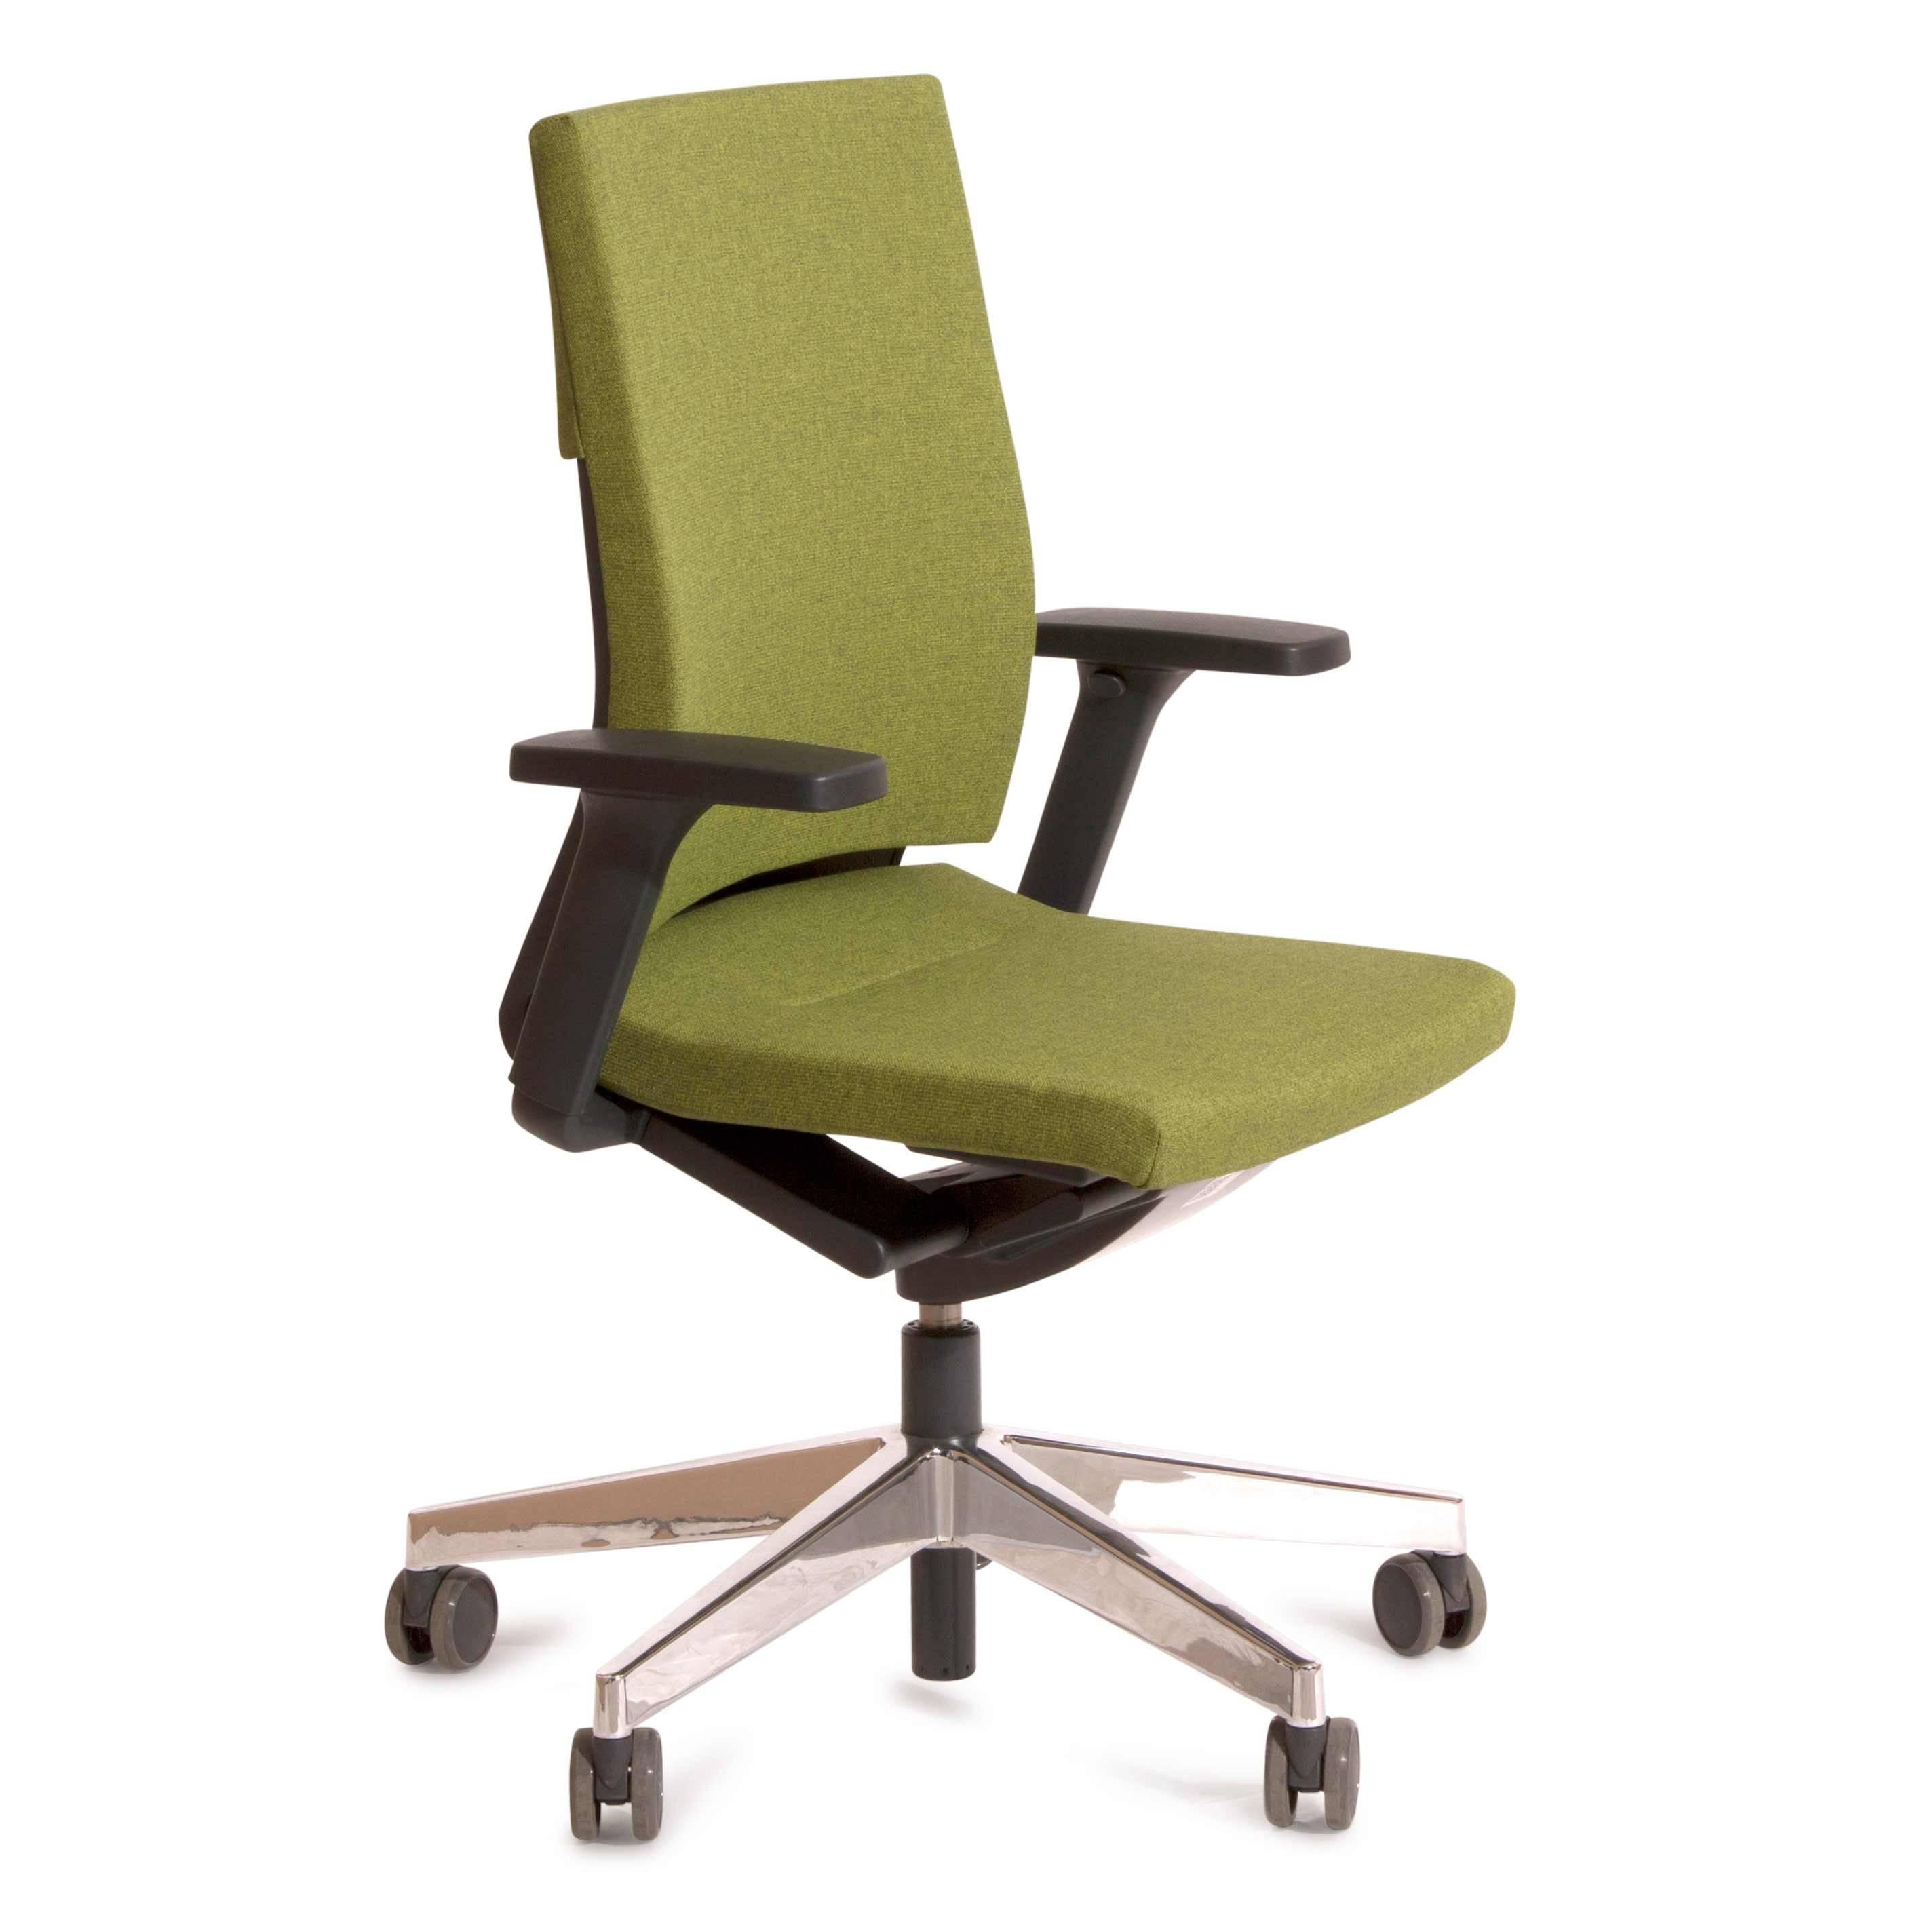 It’s not just the comfort, but also the design of Neos office chair that’s a welcome feature. The clear contours of the back and swivel arm appear seamless. The smooth aluminium casing of the synchro-adjustment mechanism conveys superb quality and